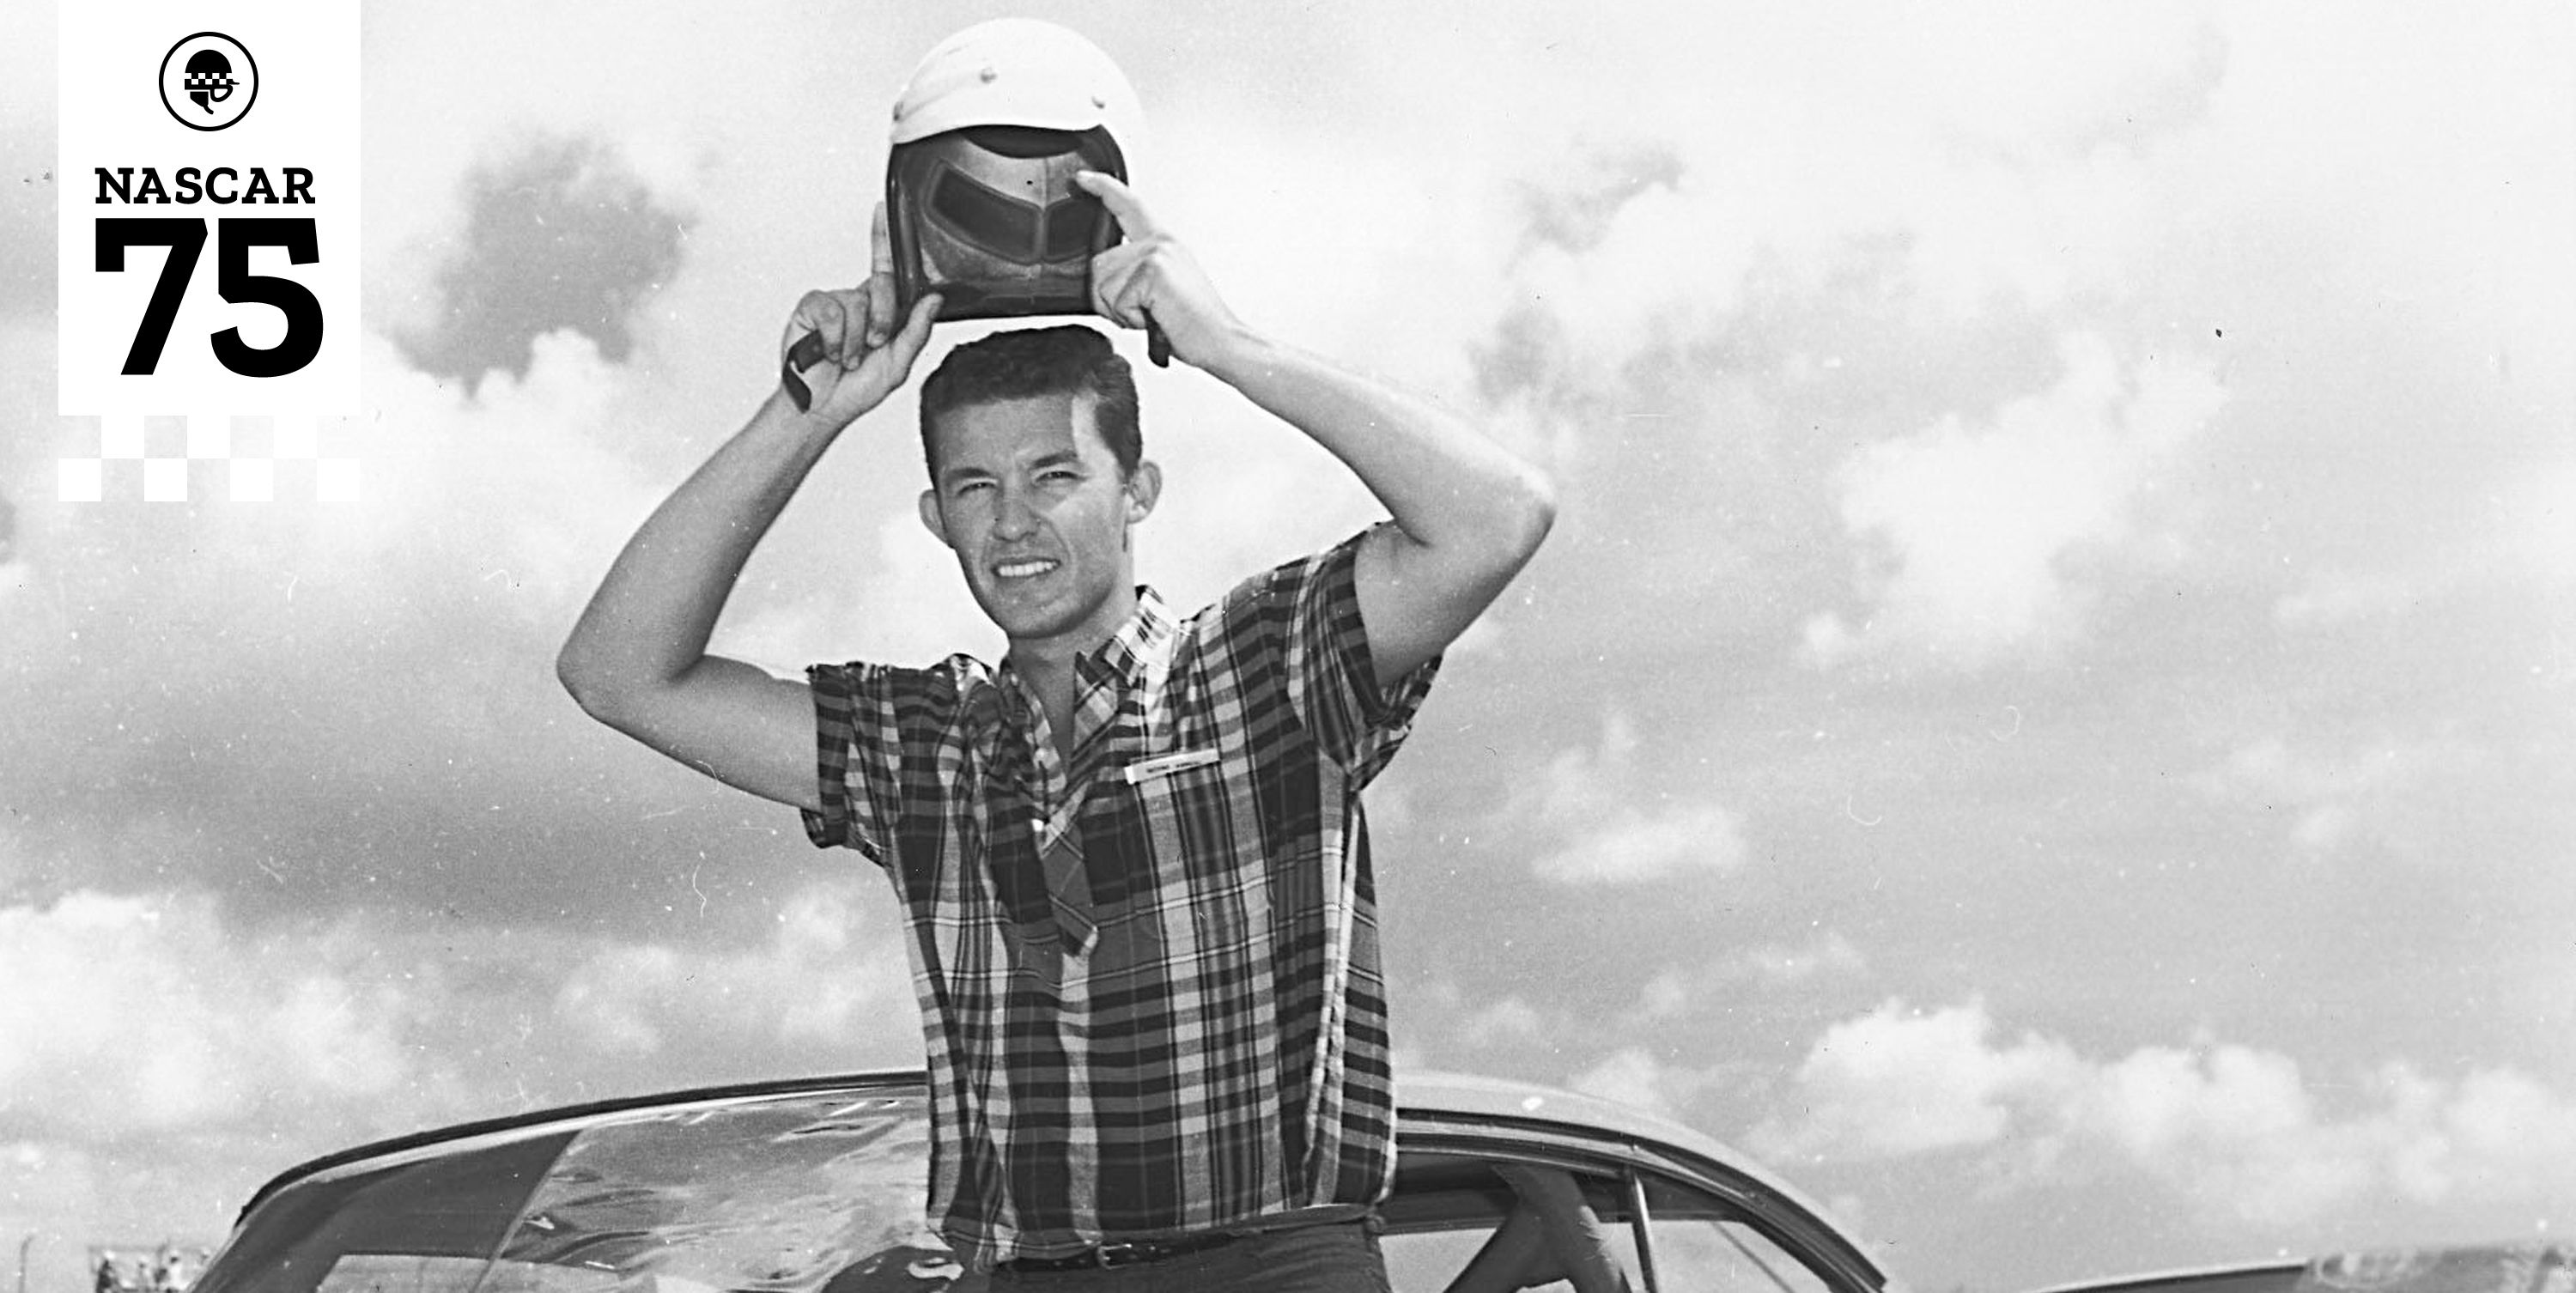 Young Richard Petty Gets NASCAR Win No. 1 on His Way to 200 in 1960